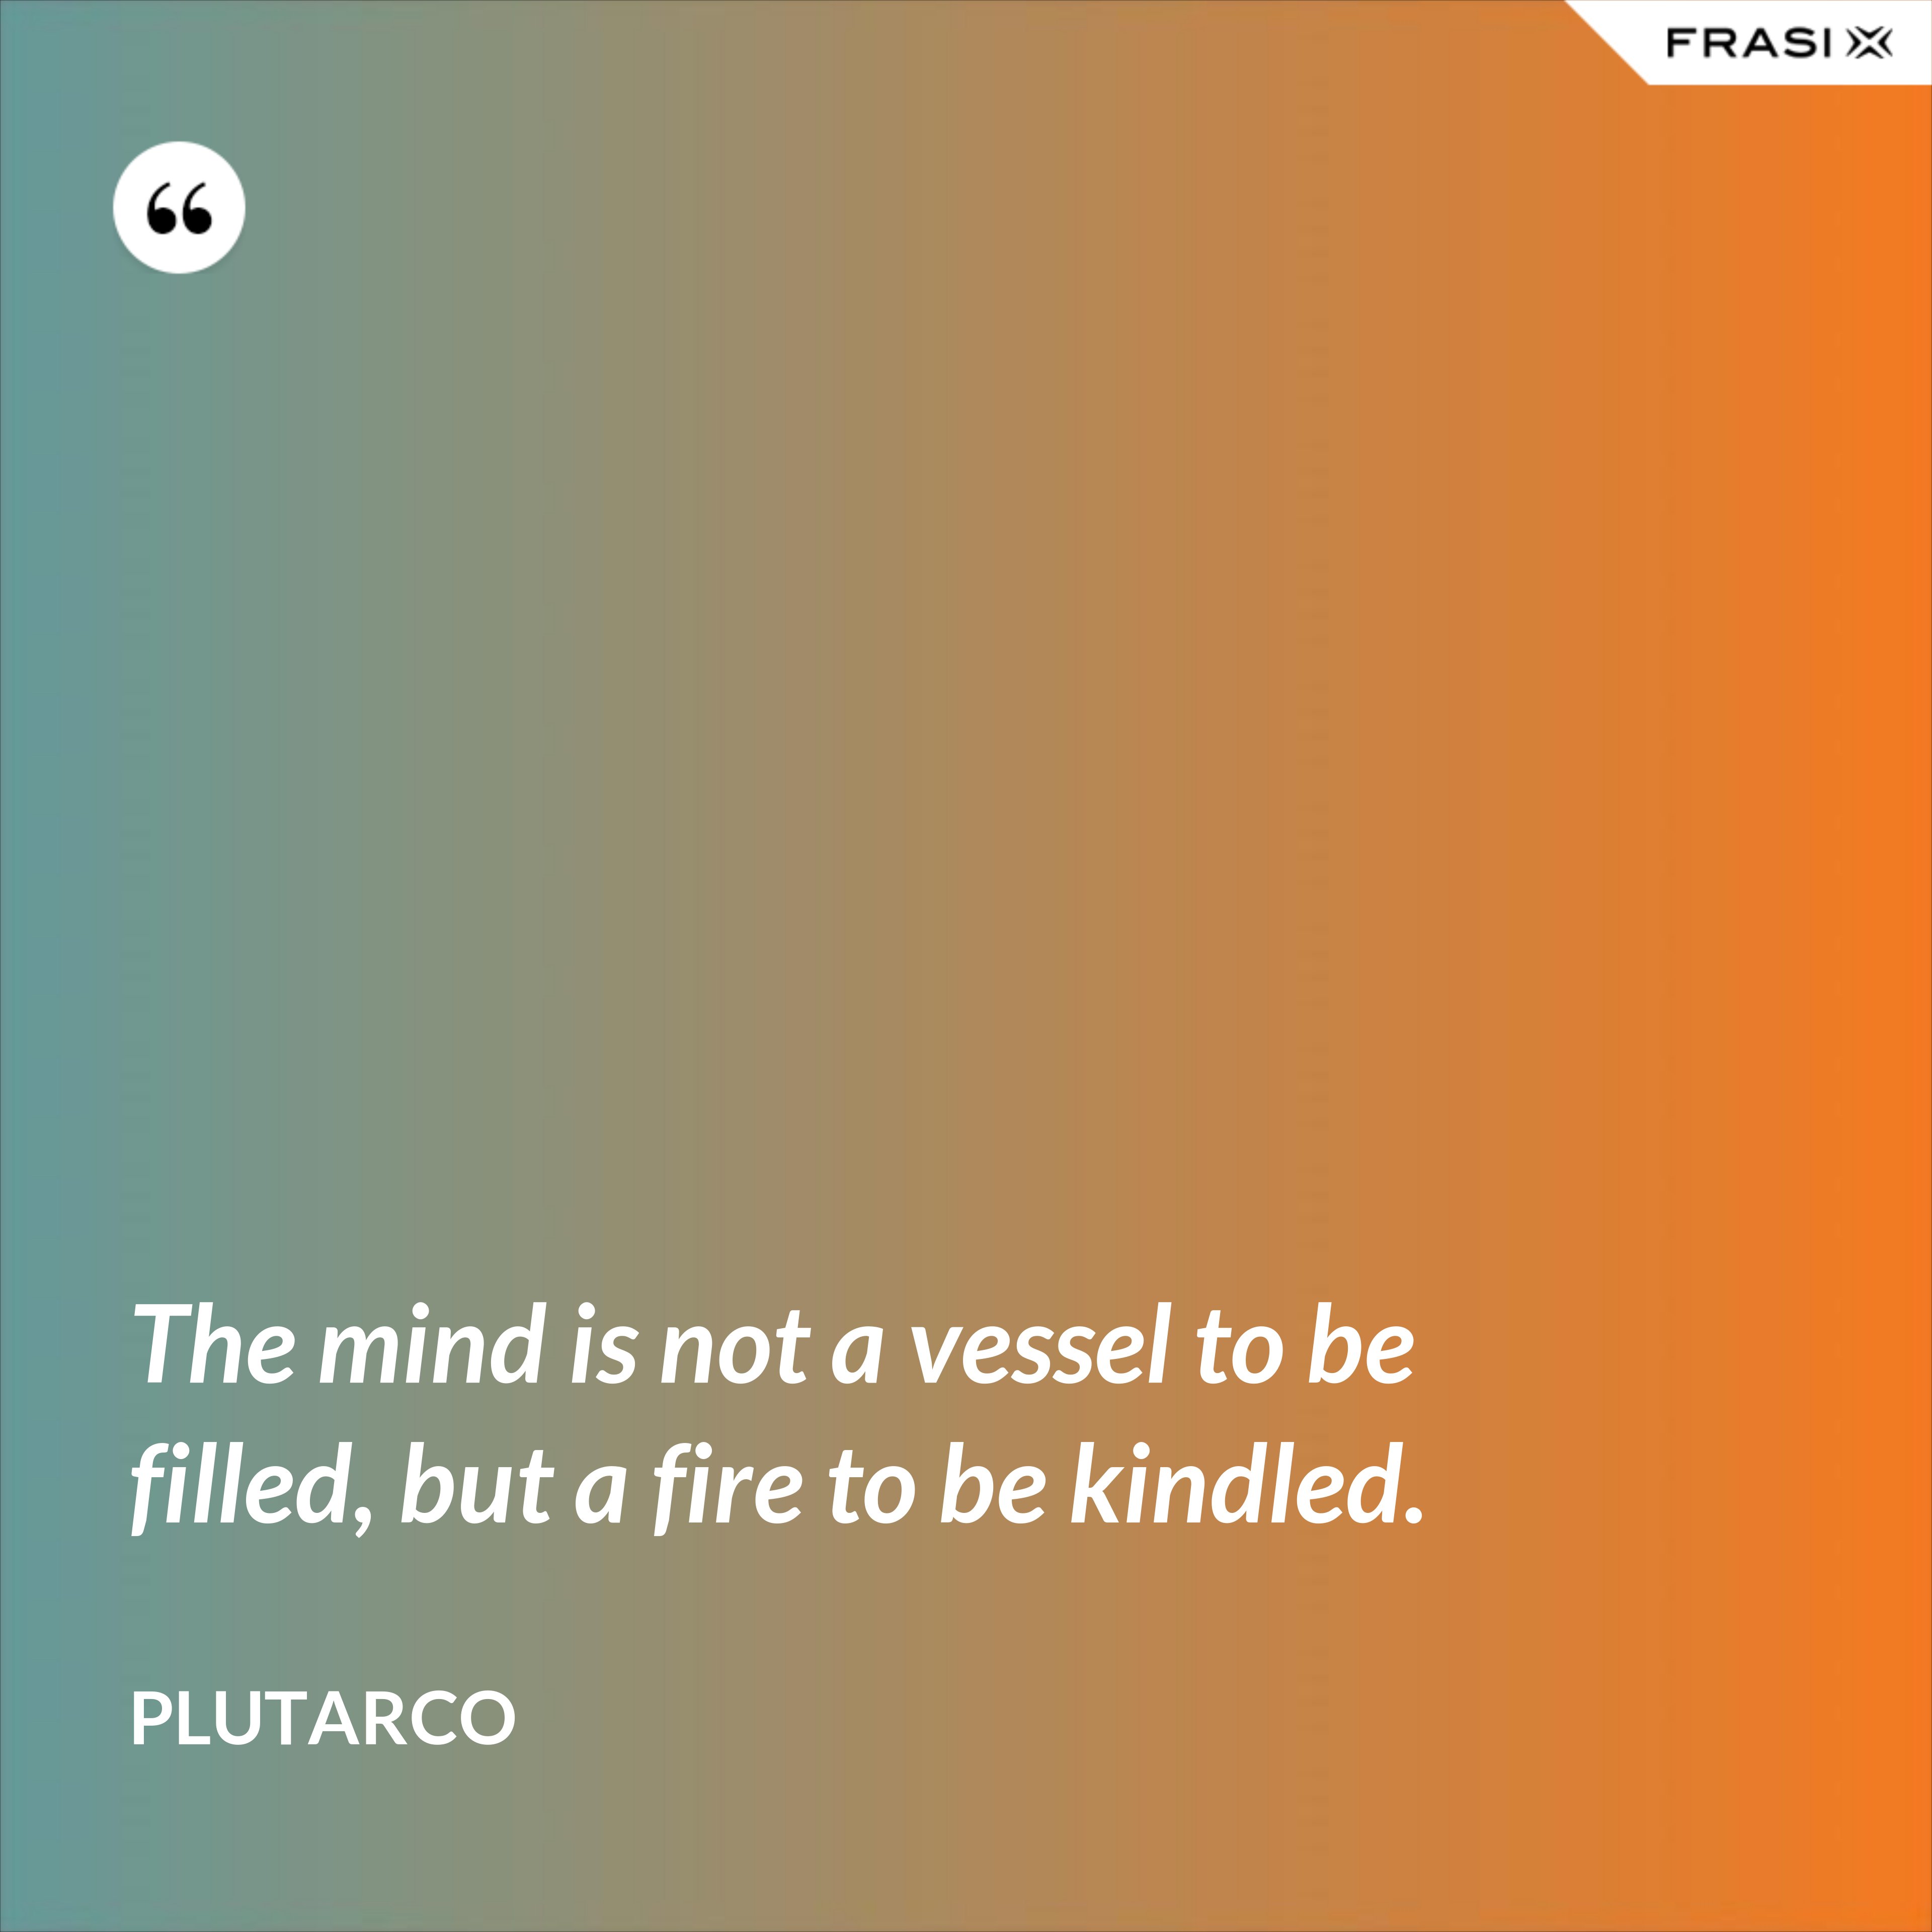 The mind is not a vessel to be filled, but a fire to be kindled. - Plutarco